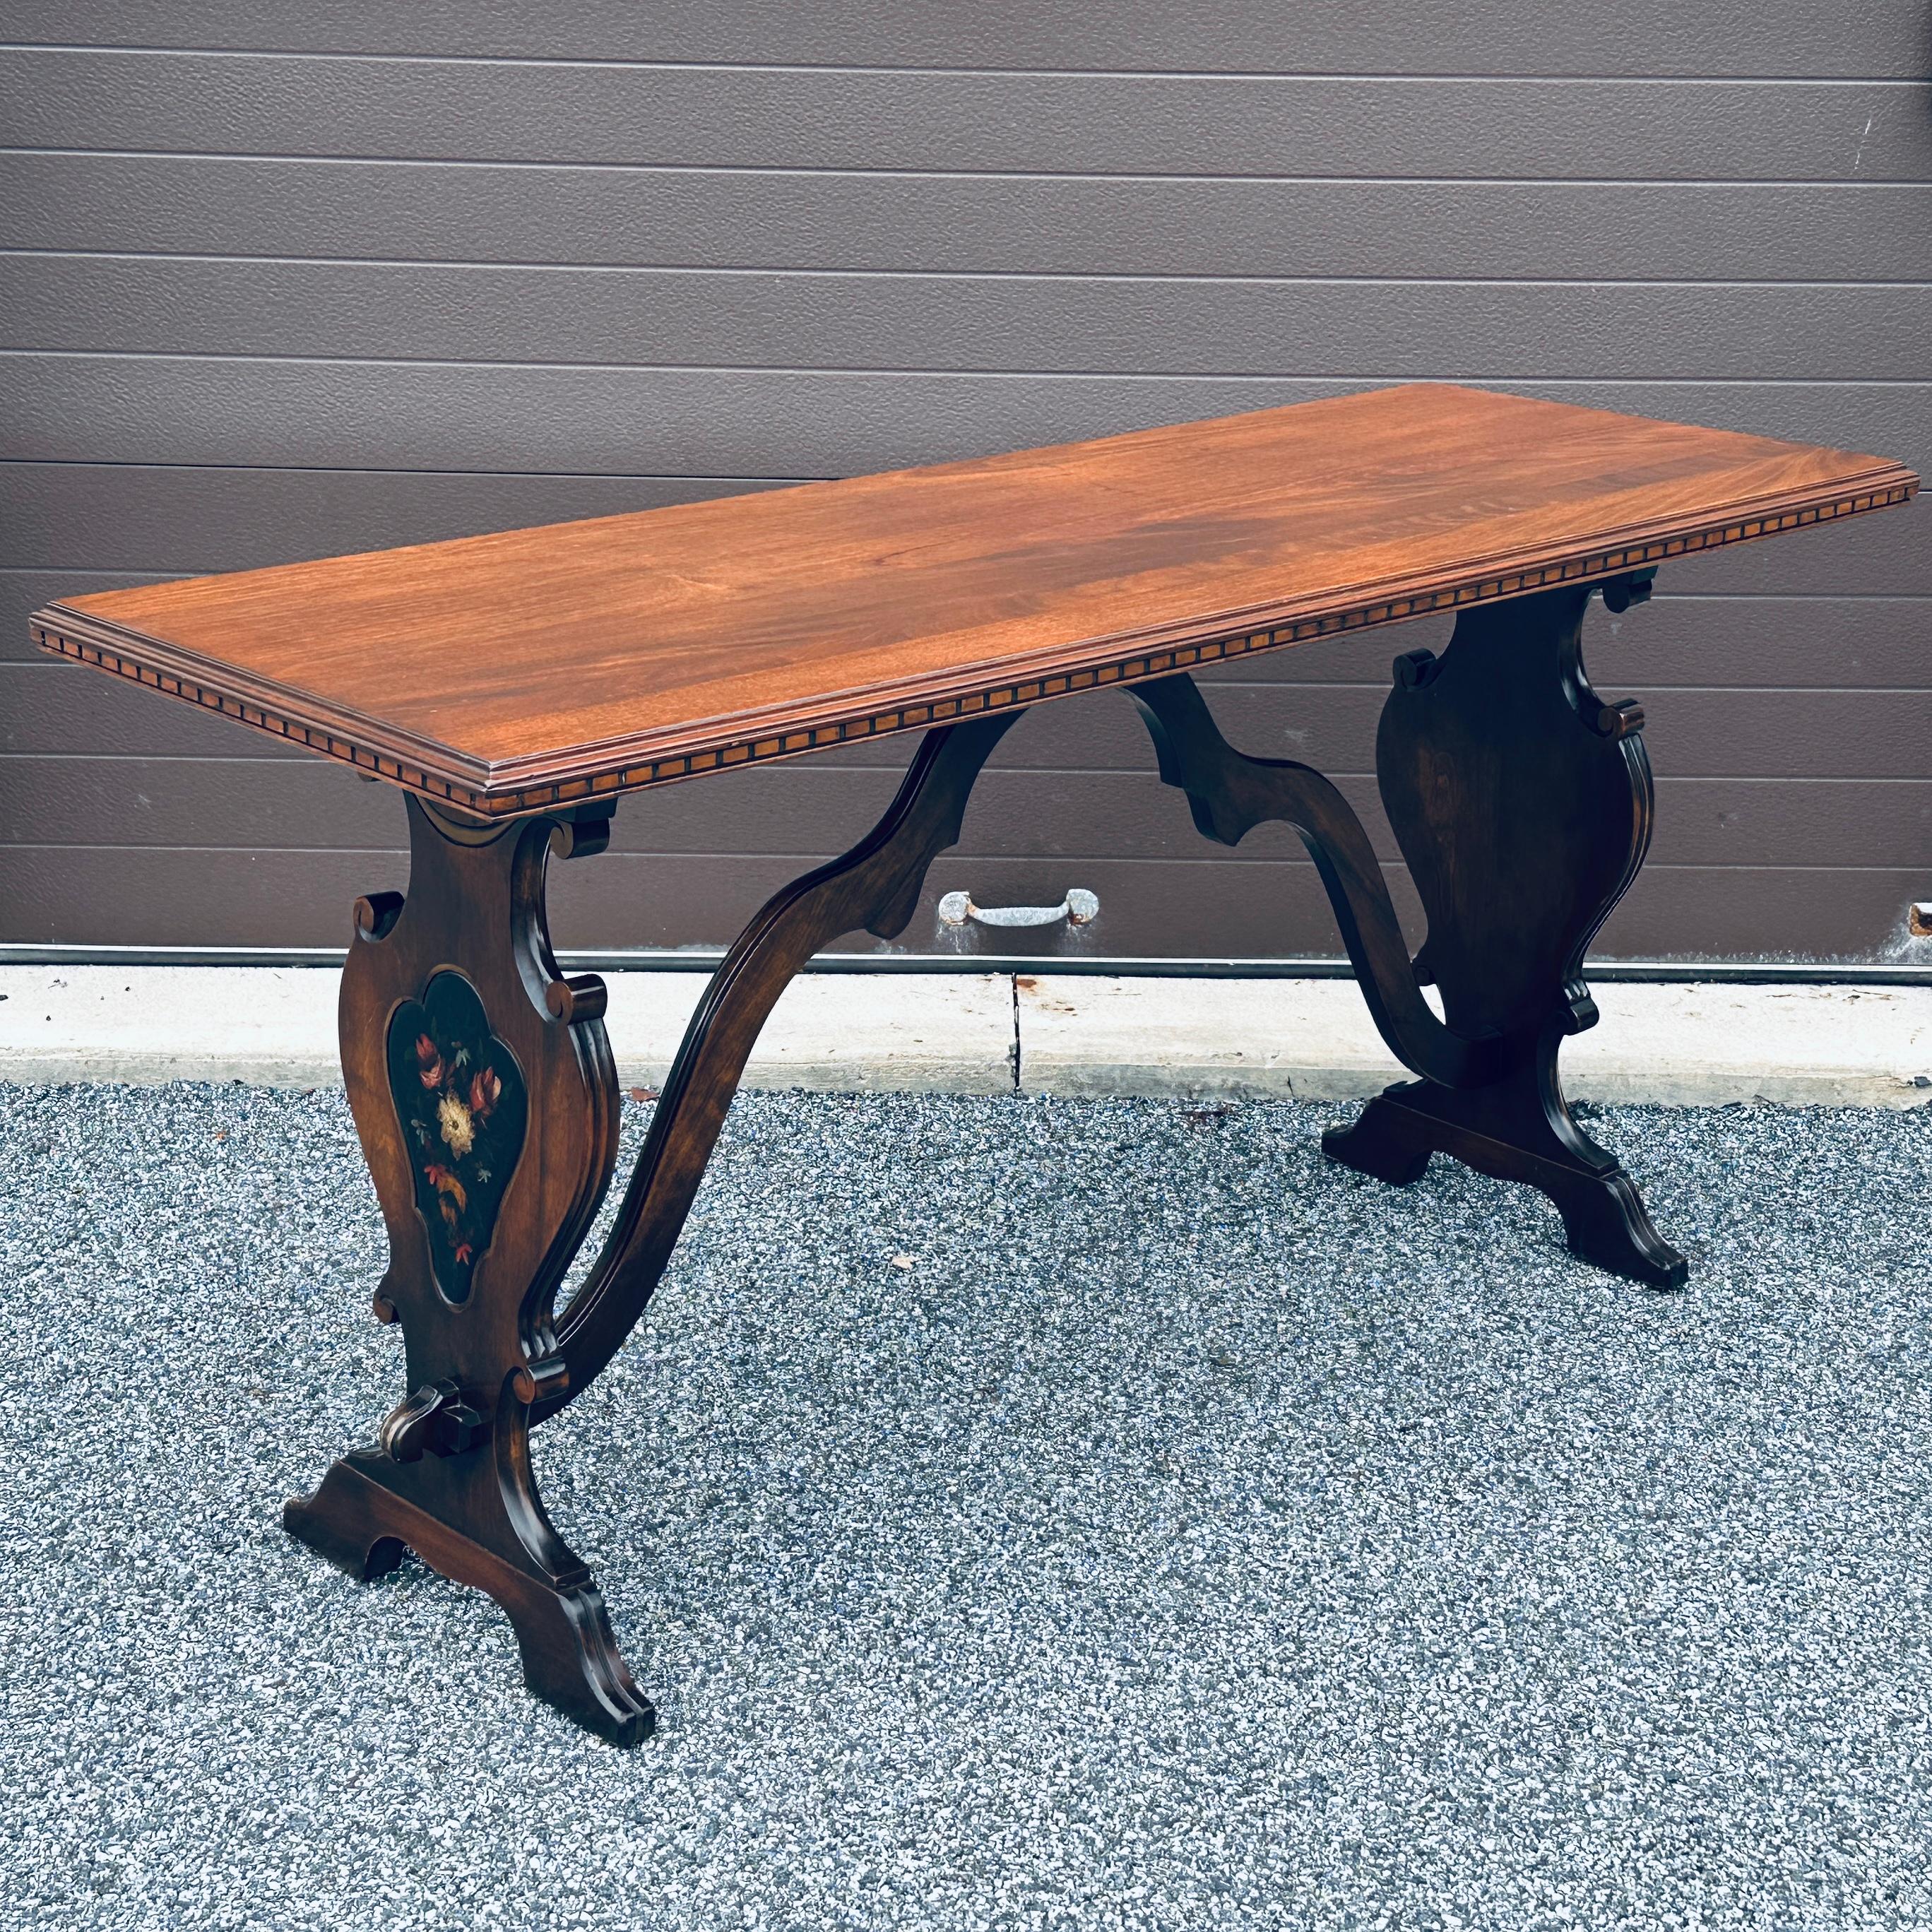 Antique solid walnut console table by Elgin A. Simonds of Syracuse, New York circa 1920.